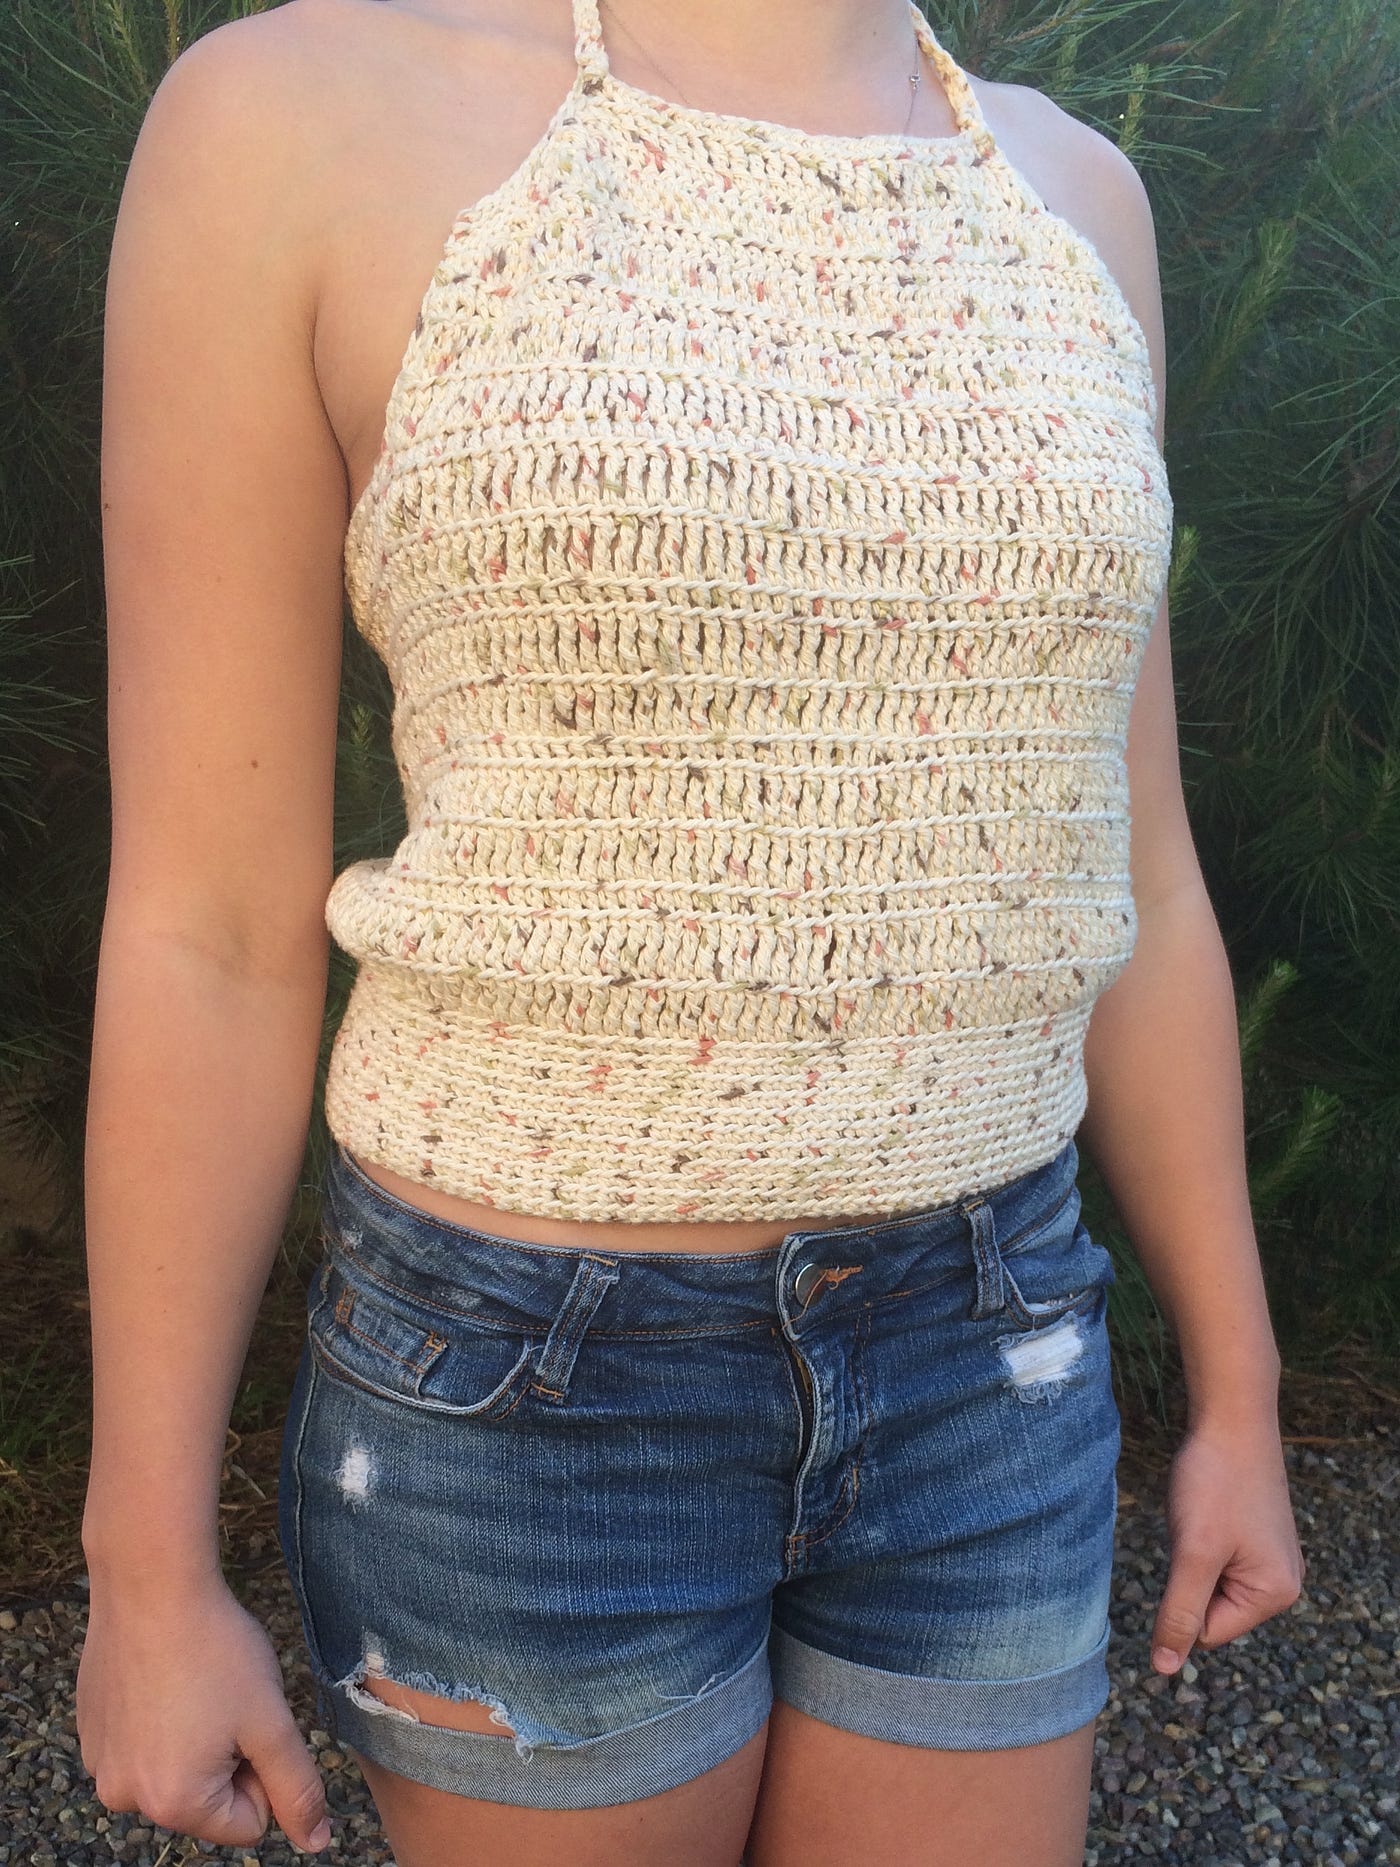 Simple Crochet Halter Top. Free Pattern and Video Tutorial